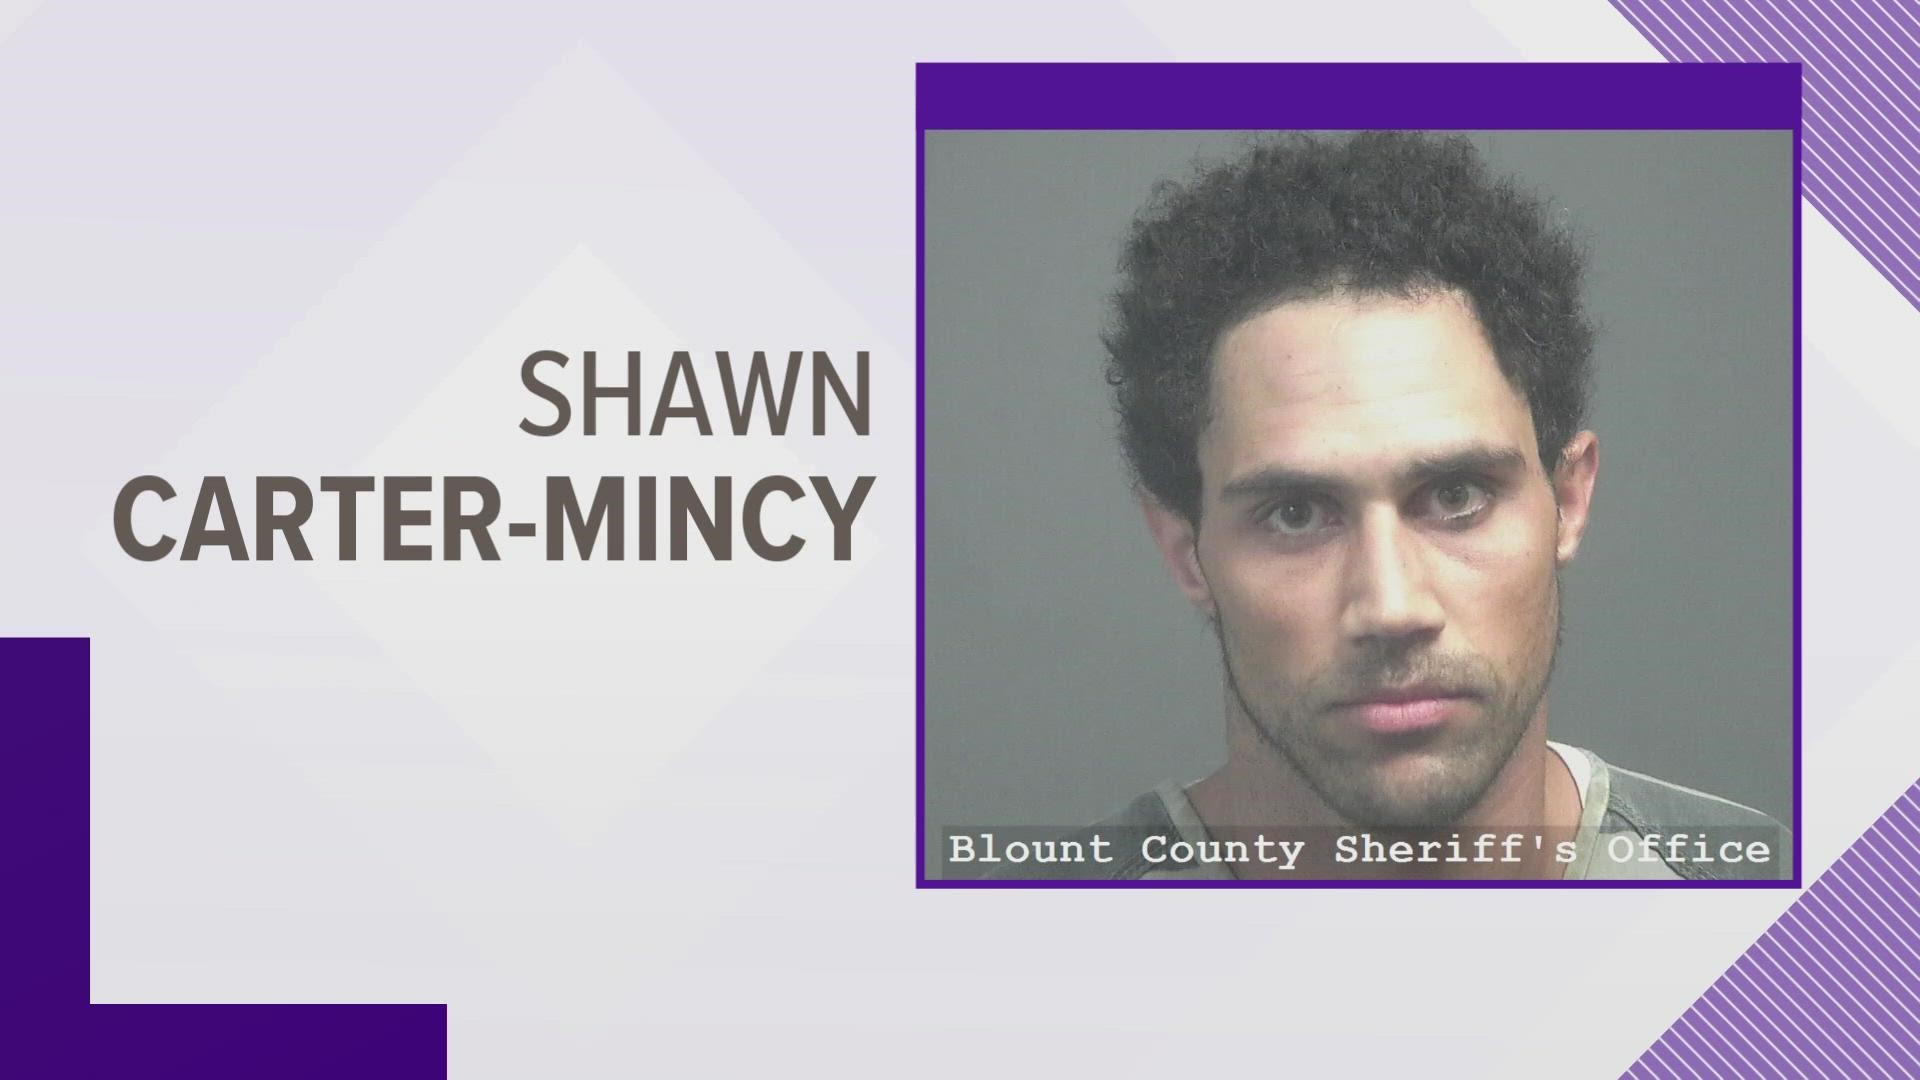 According to U.S. Marshals, Shawn Carter-Mincay was wanted out of Knox County, Indiana, for shooting a family member twice with a handgun during a domestic dispute.